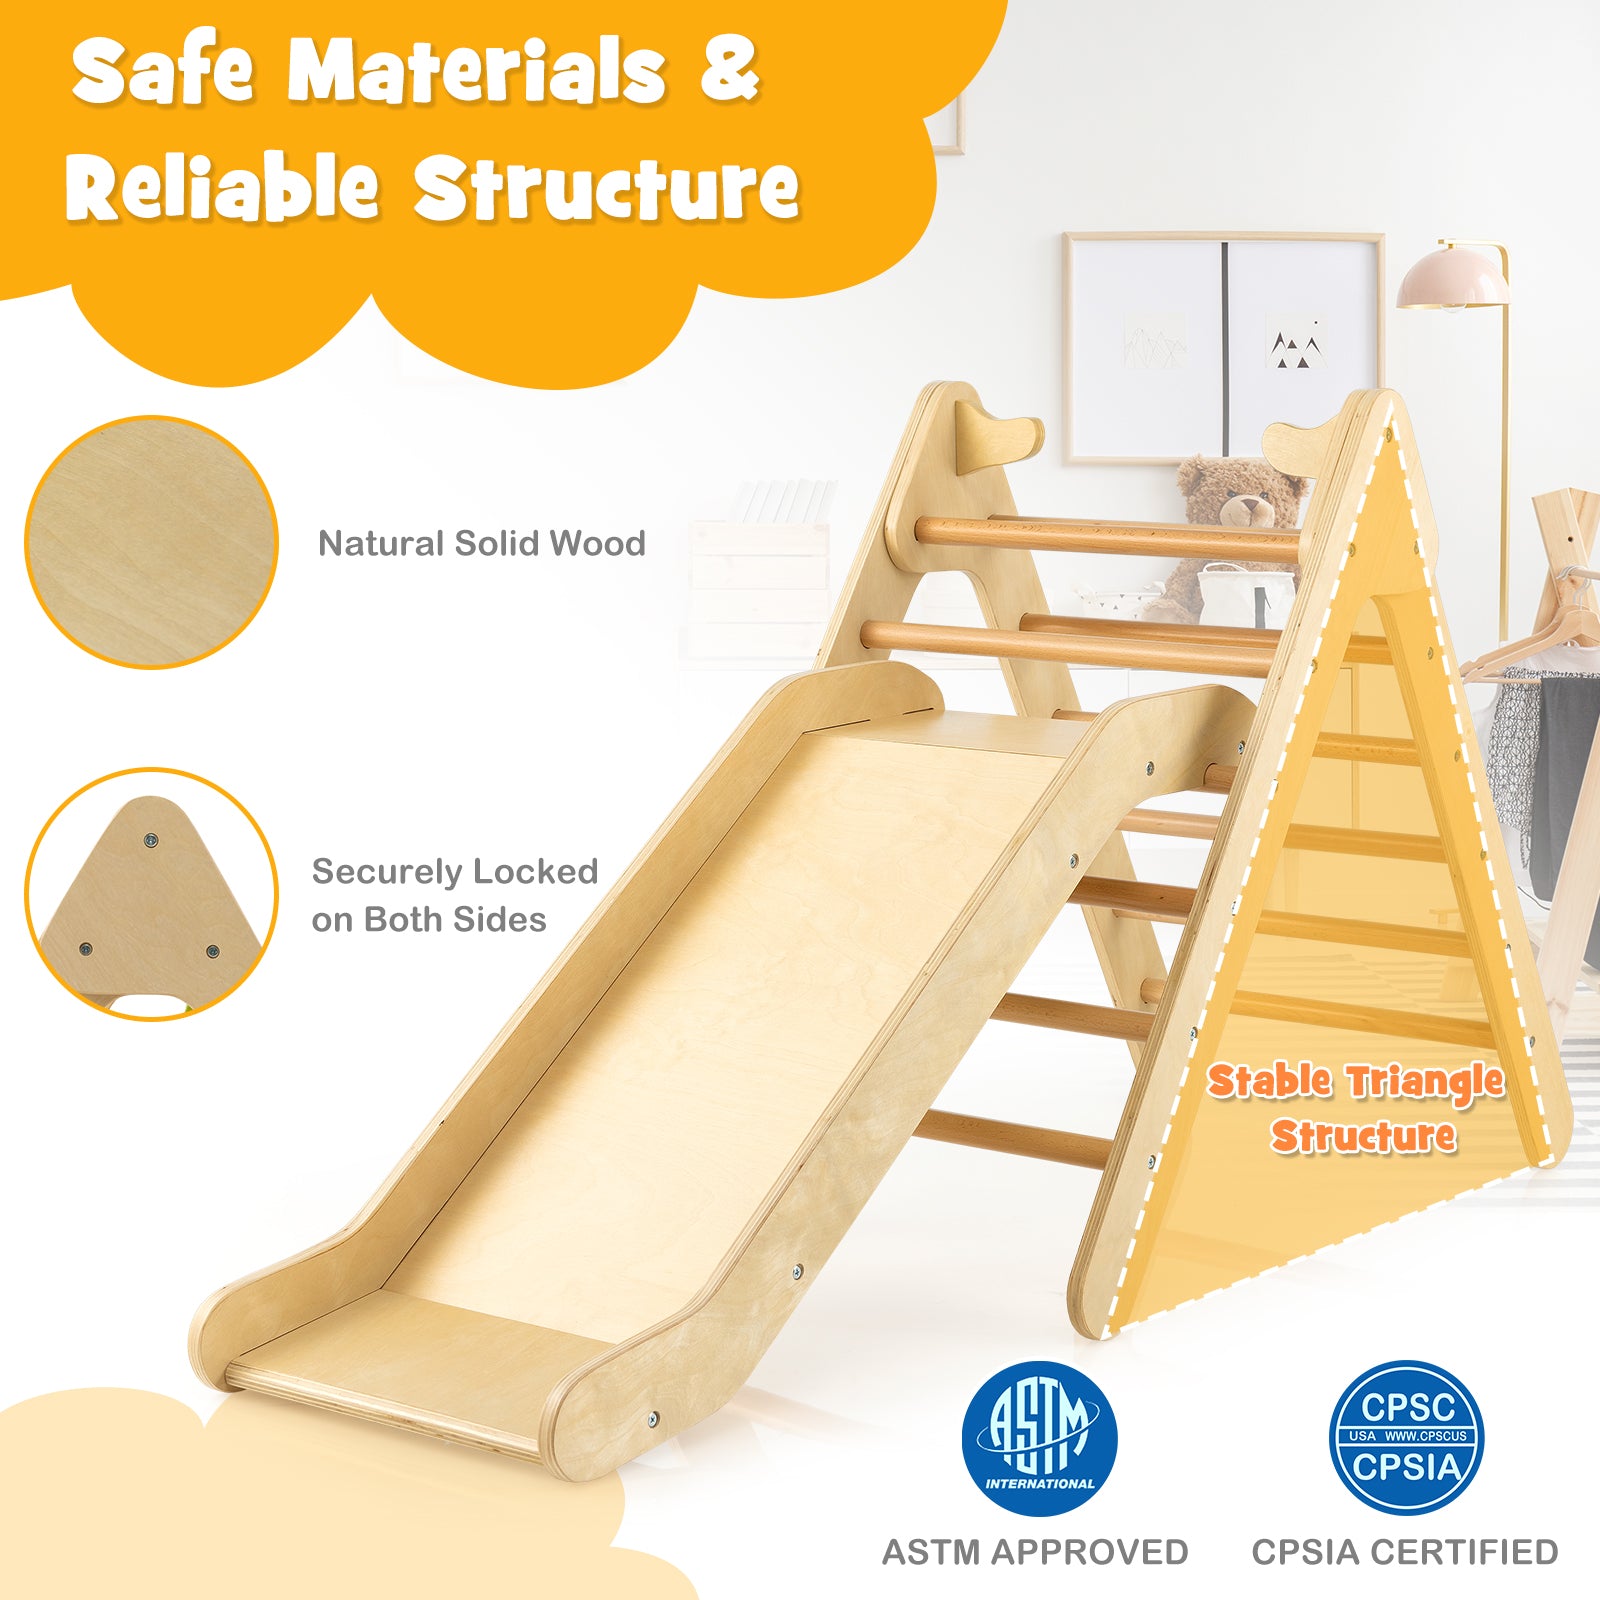 2-in-1 Wooden Triangle Climber Set with Adjustable Slide for Kids